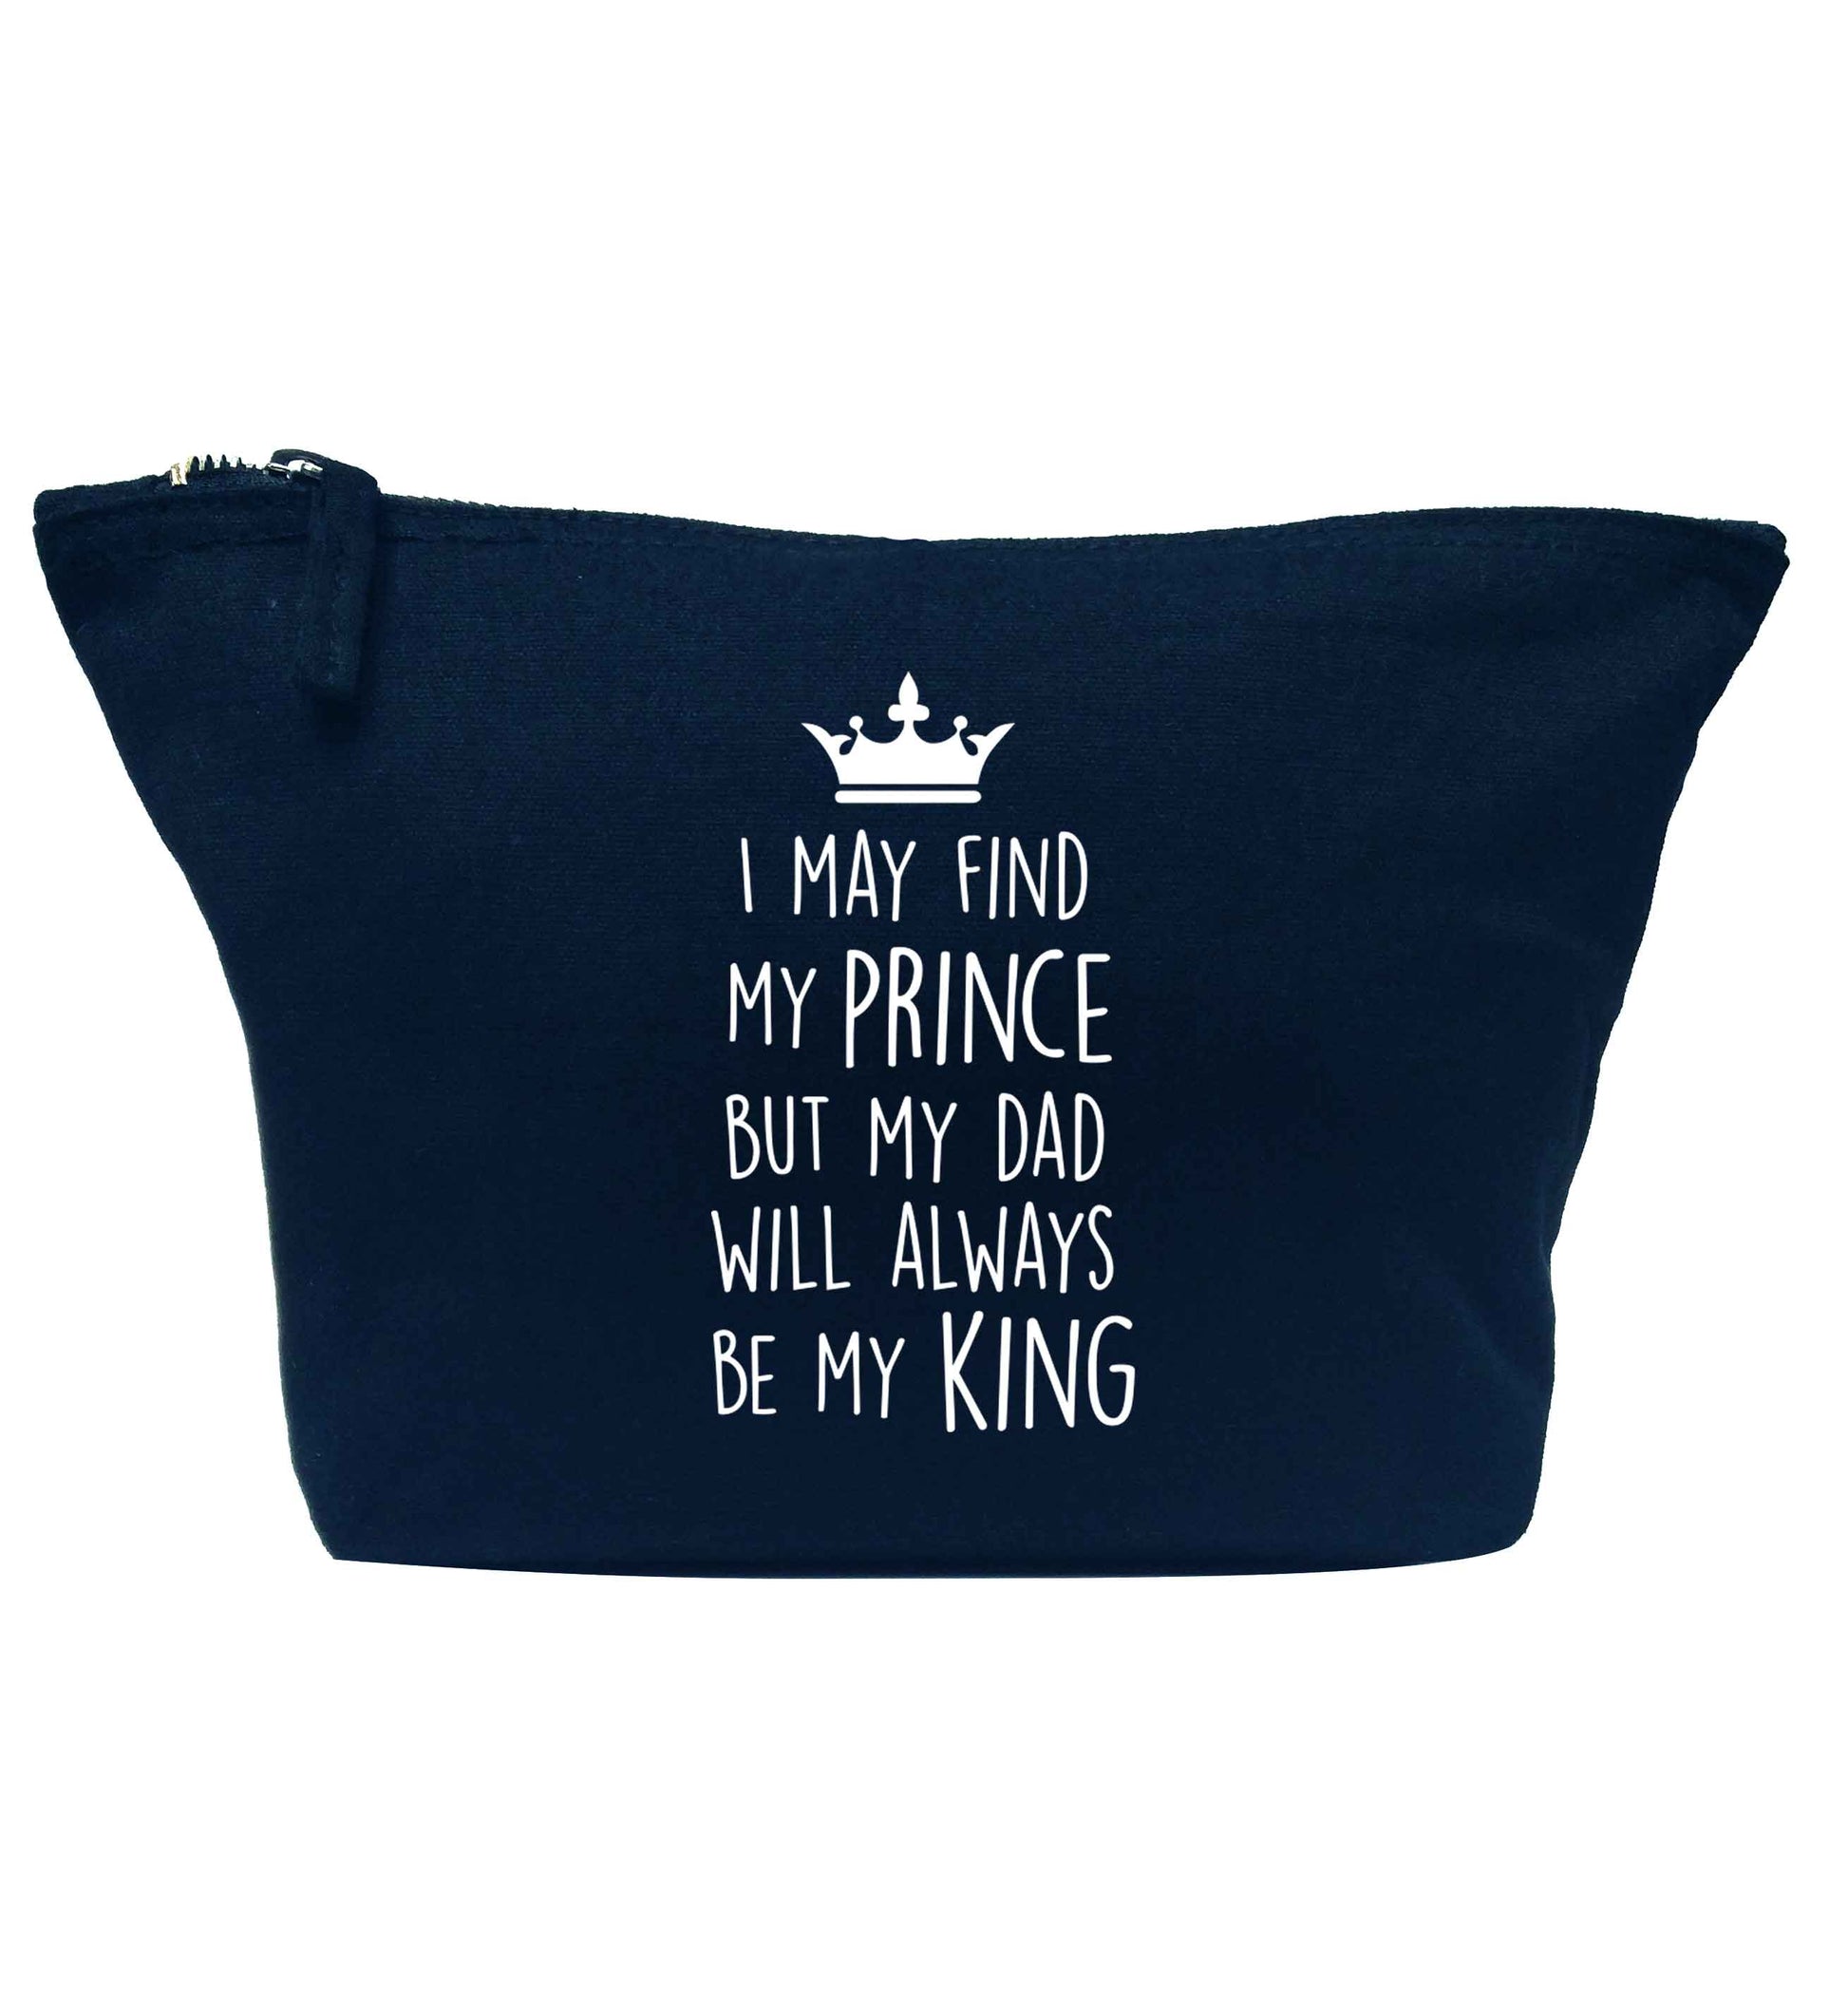 I may find my prince but my dad will always be my king navy makeup bag